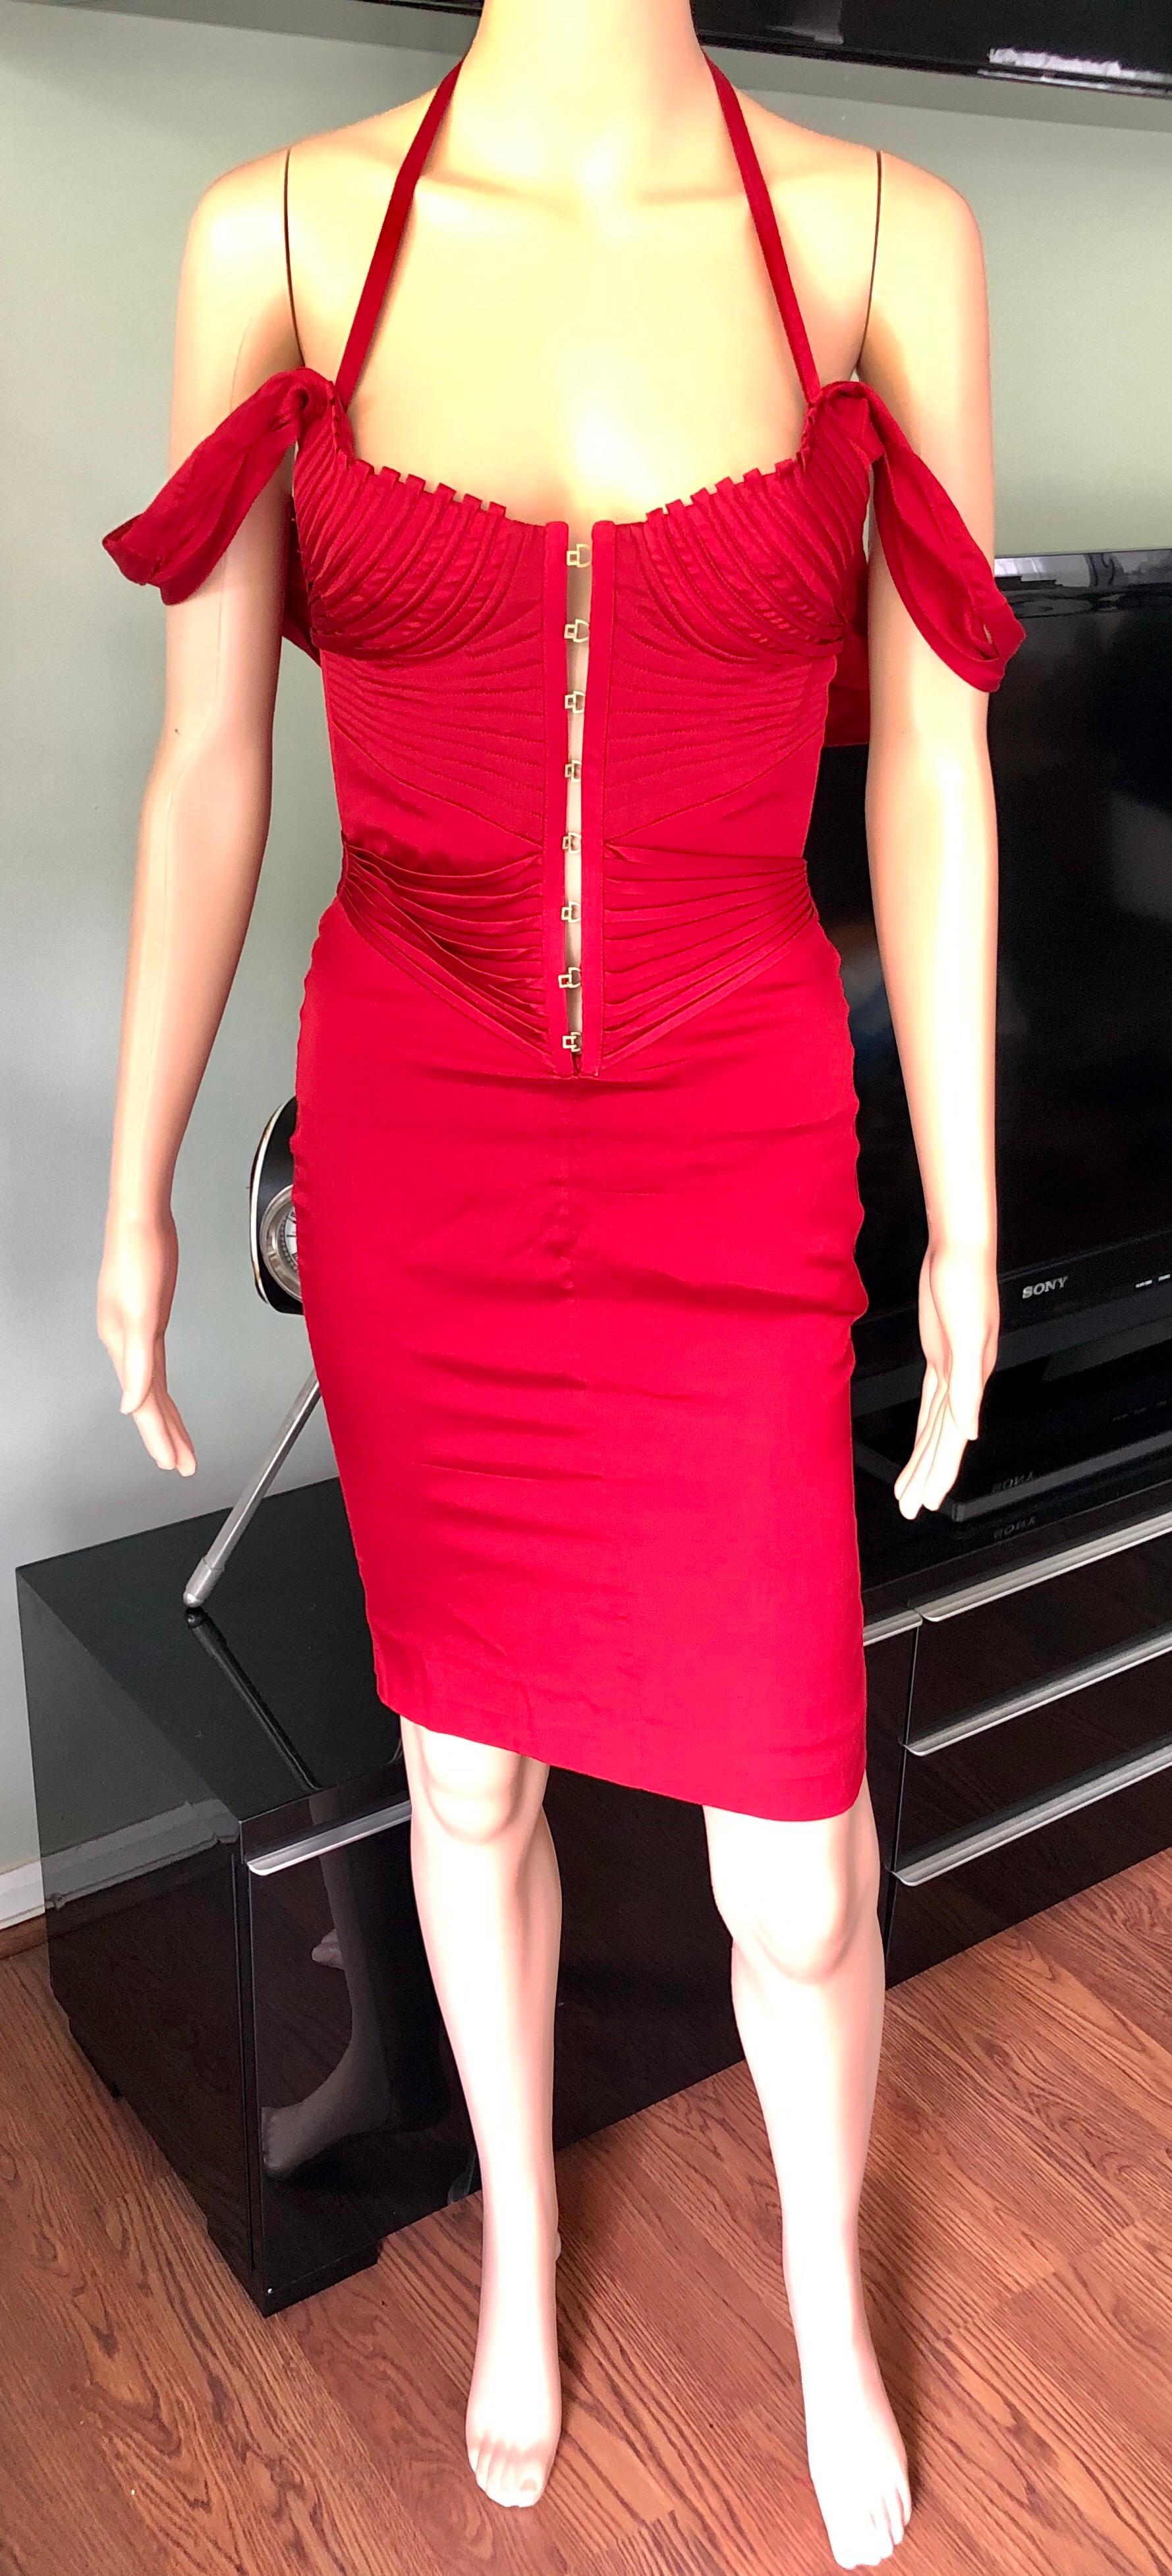 tom ford for gucci red dress